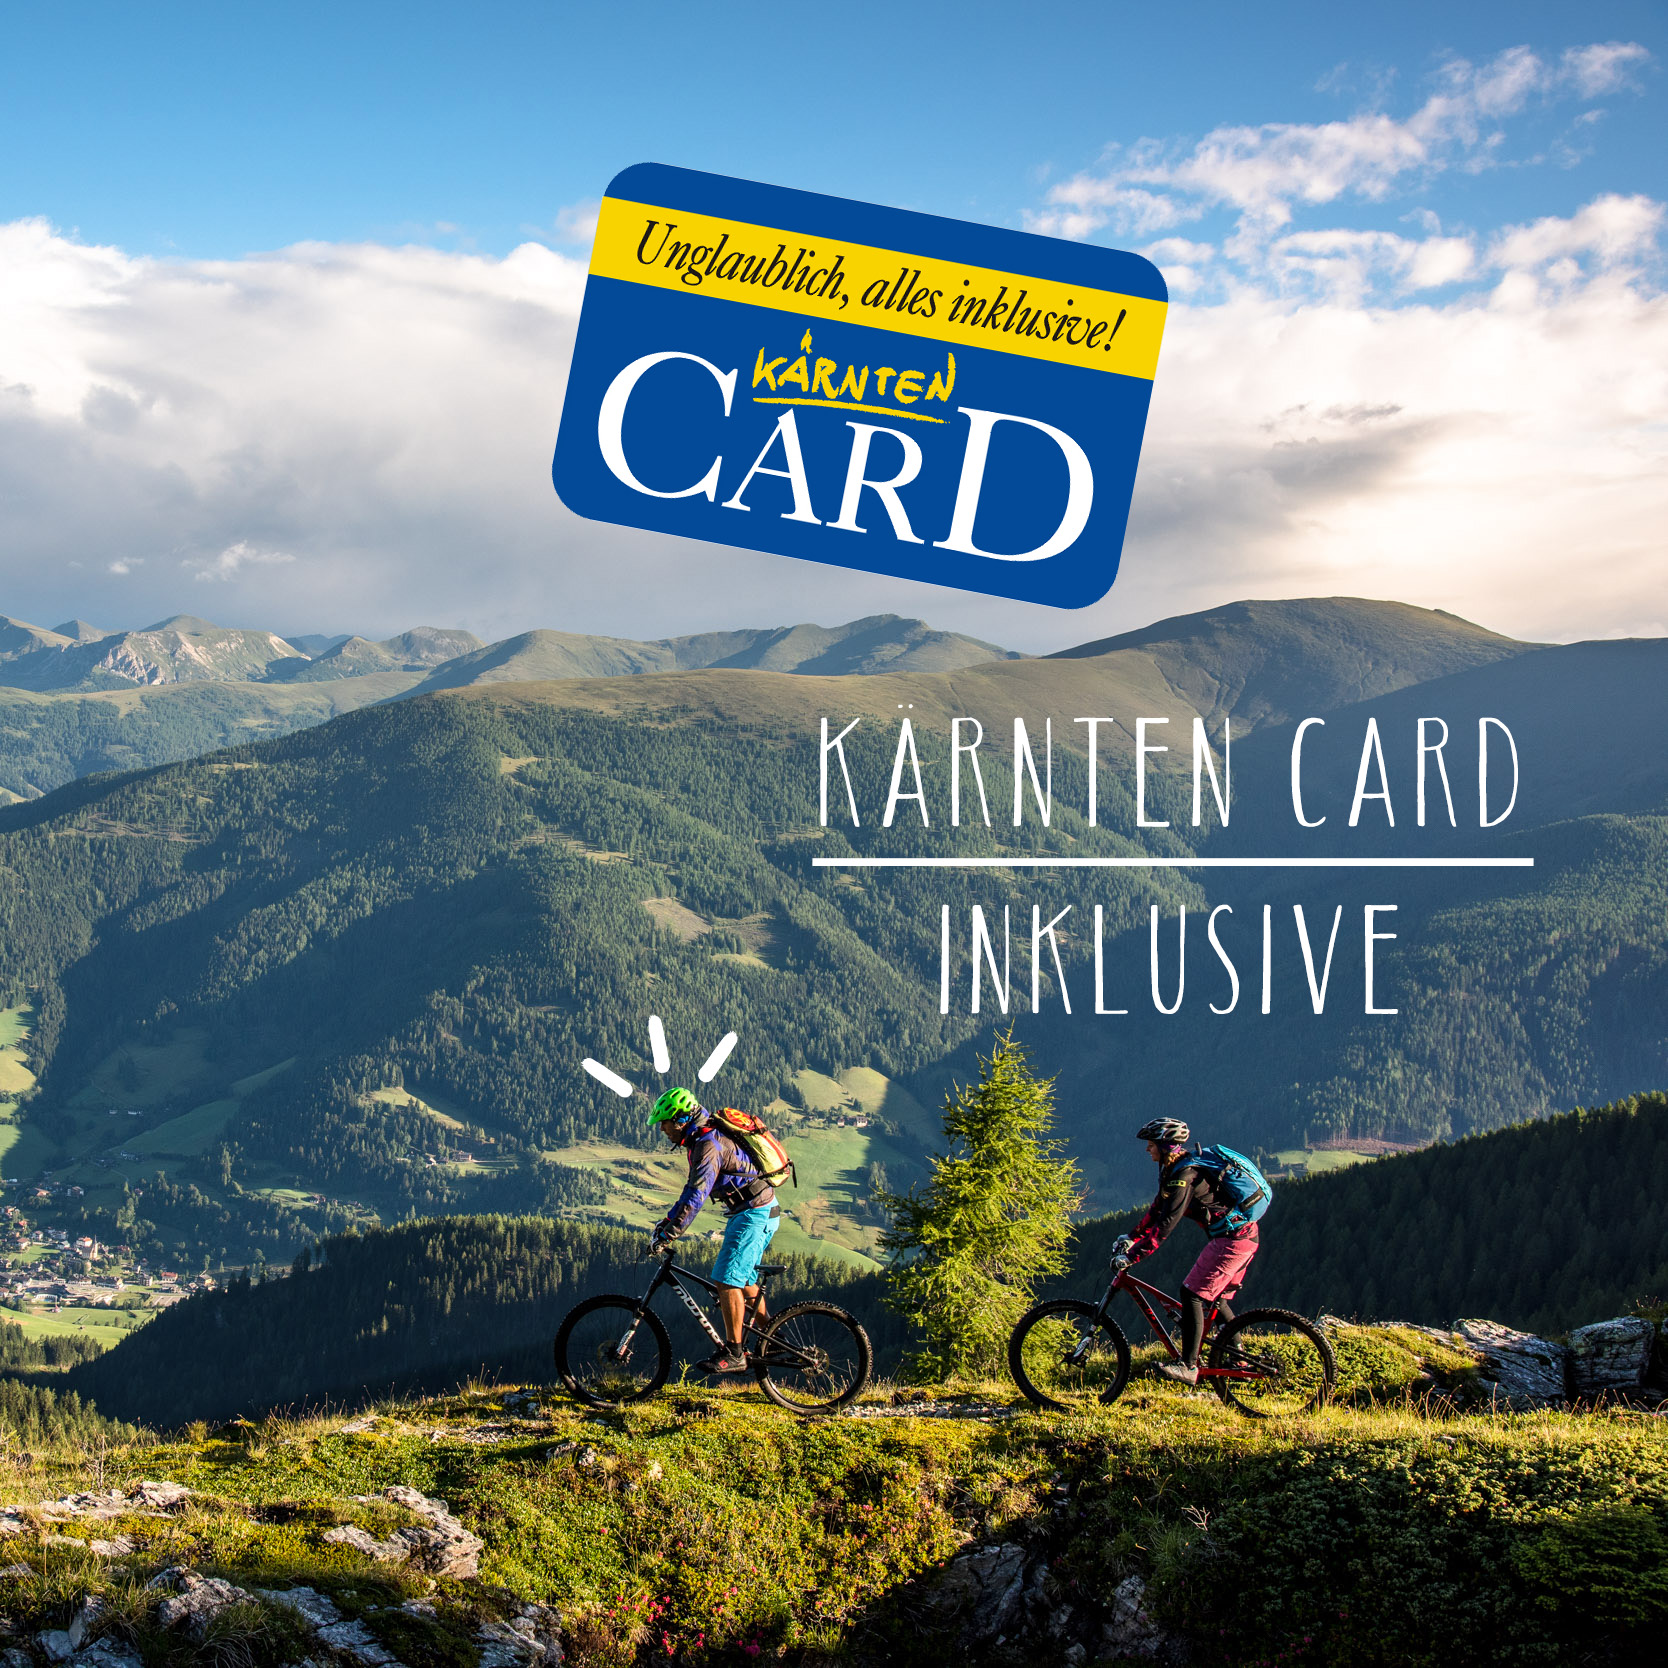 Carinthia Card included: You receive the Carinthia Card with an overnight stay in our establishment - The card is the perfect companion to discover the diversity of the region and Carinthia.